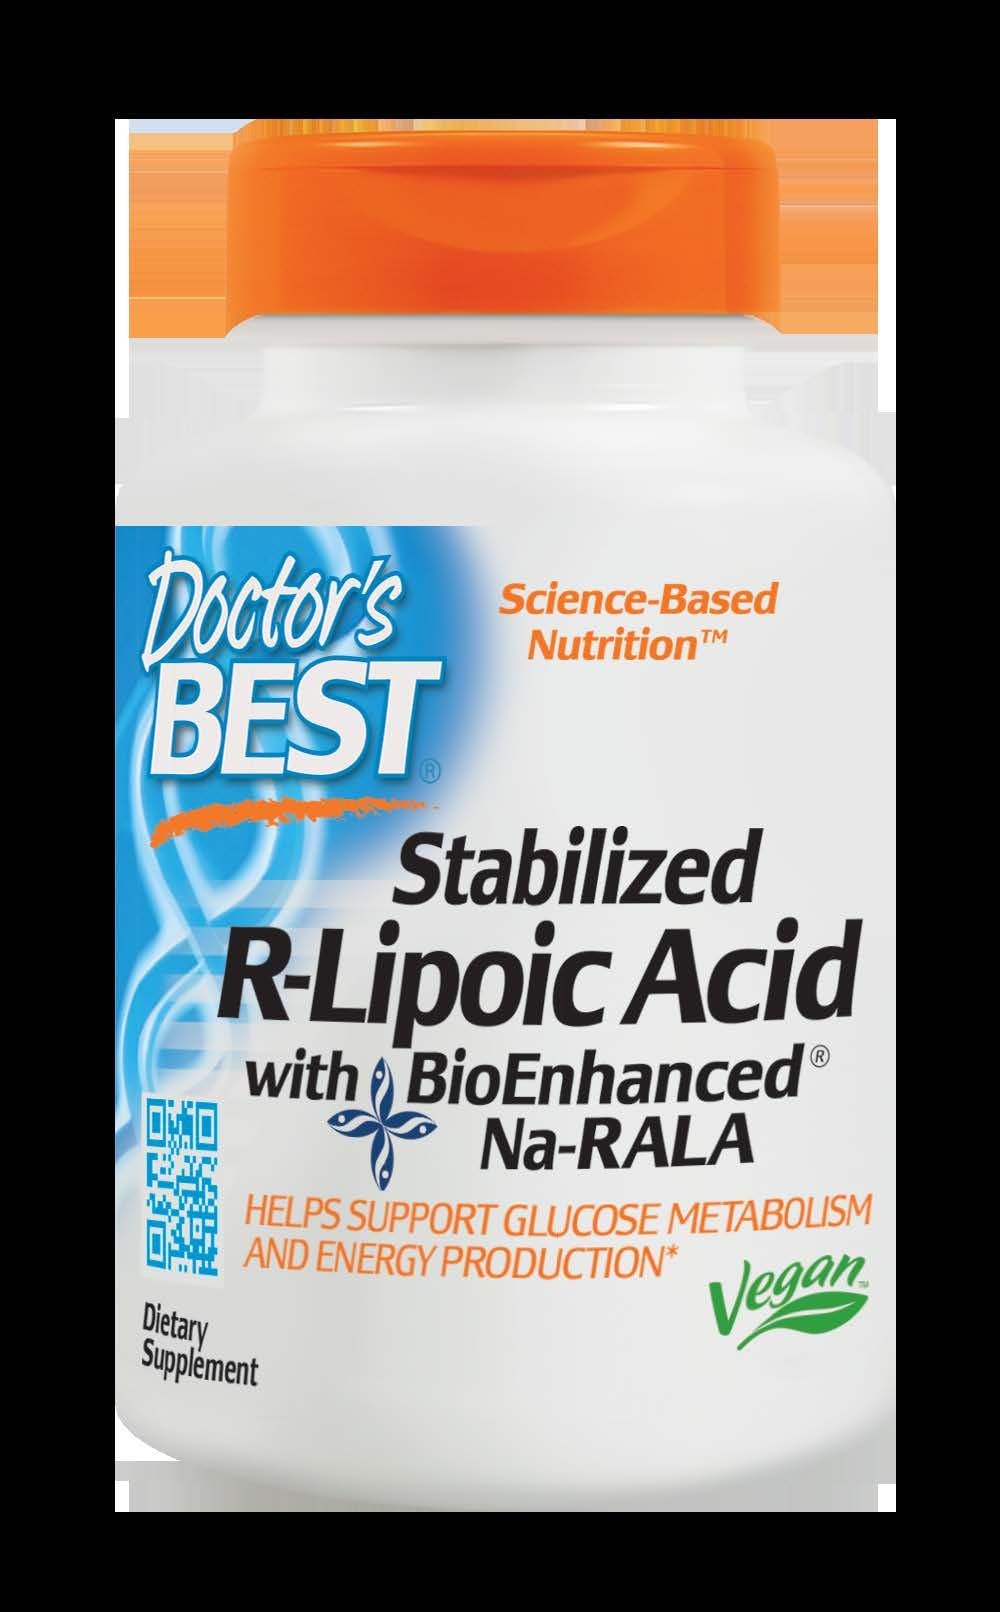 R-lipoic acid is naturally synthesized by humans, animals, and plants.